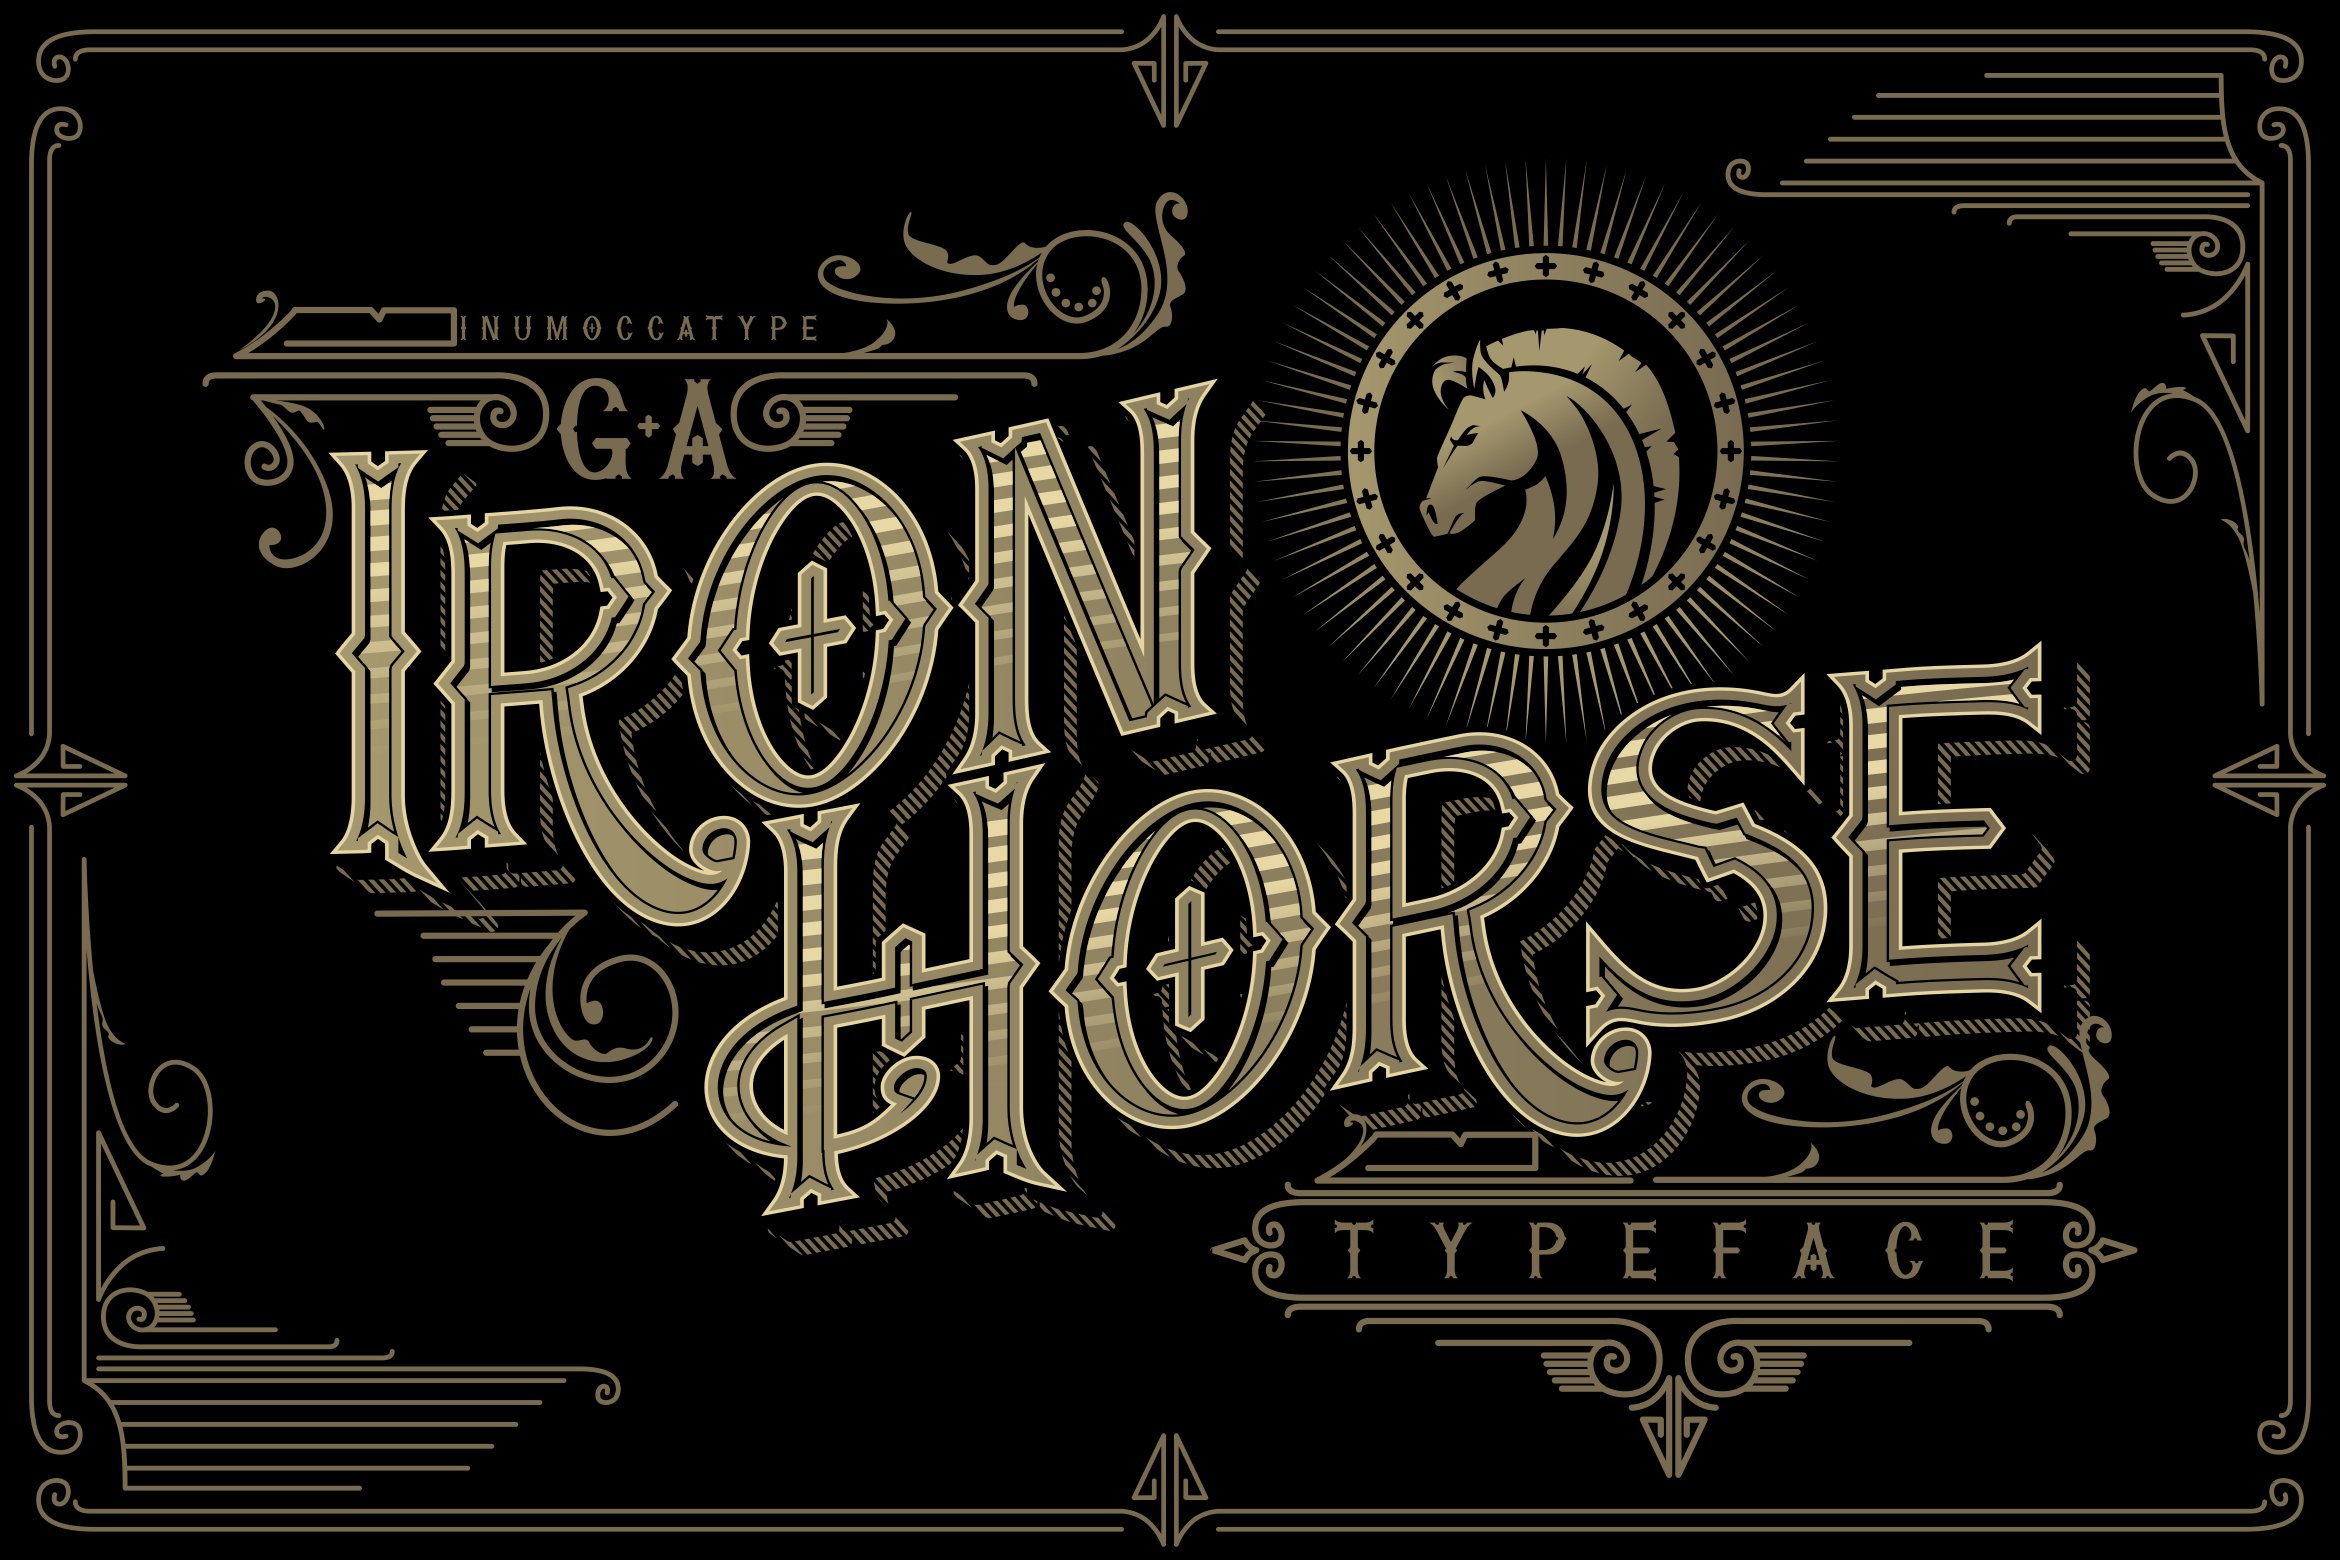 G.A Iron Horse cover image.